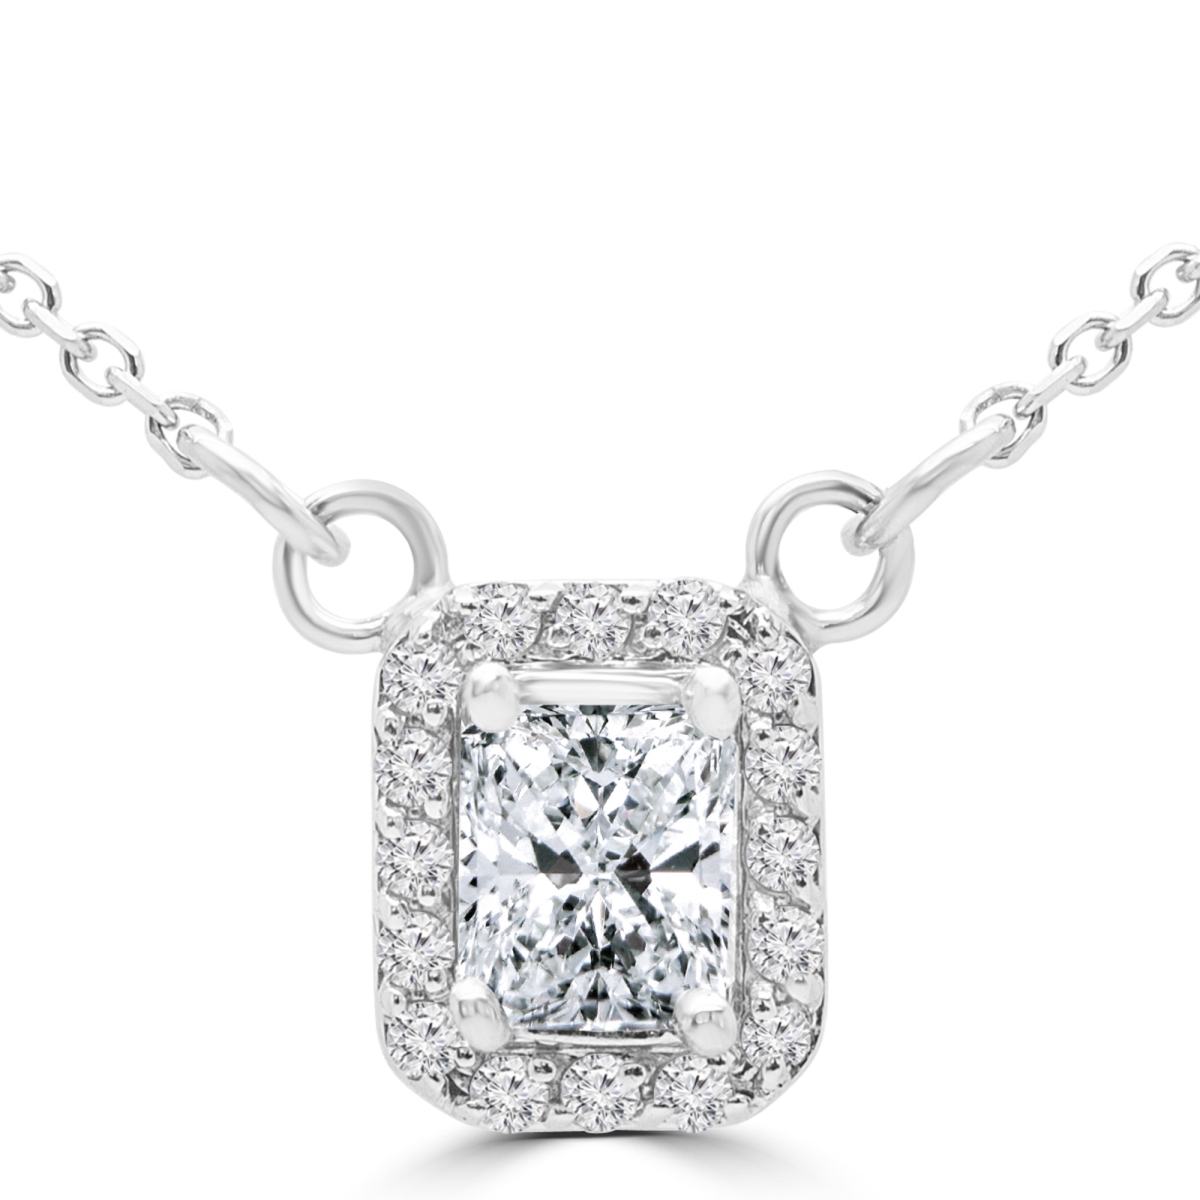 Md170150 0.6 Ctw Radiant Diamond Halo Solitaire With Accents Pendant Necklace In 14k